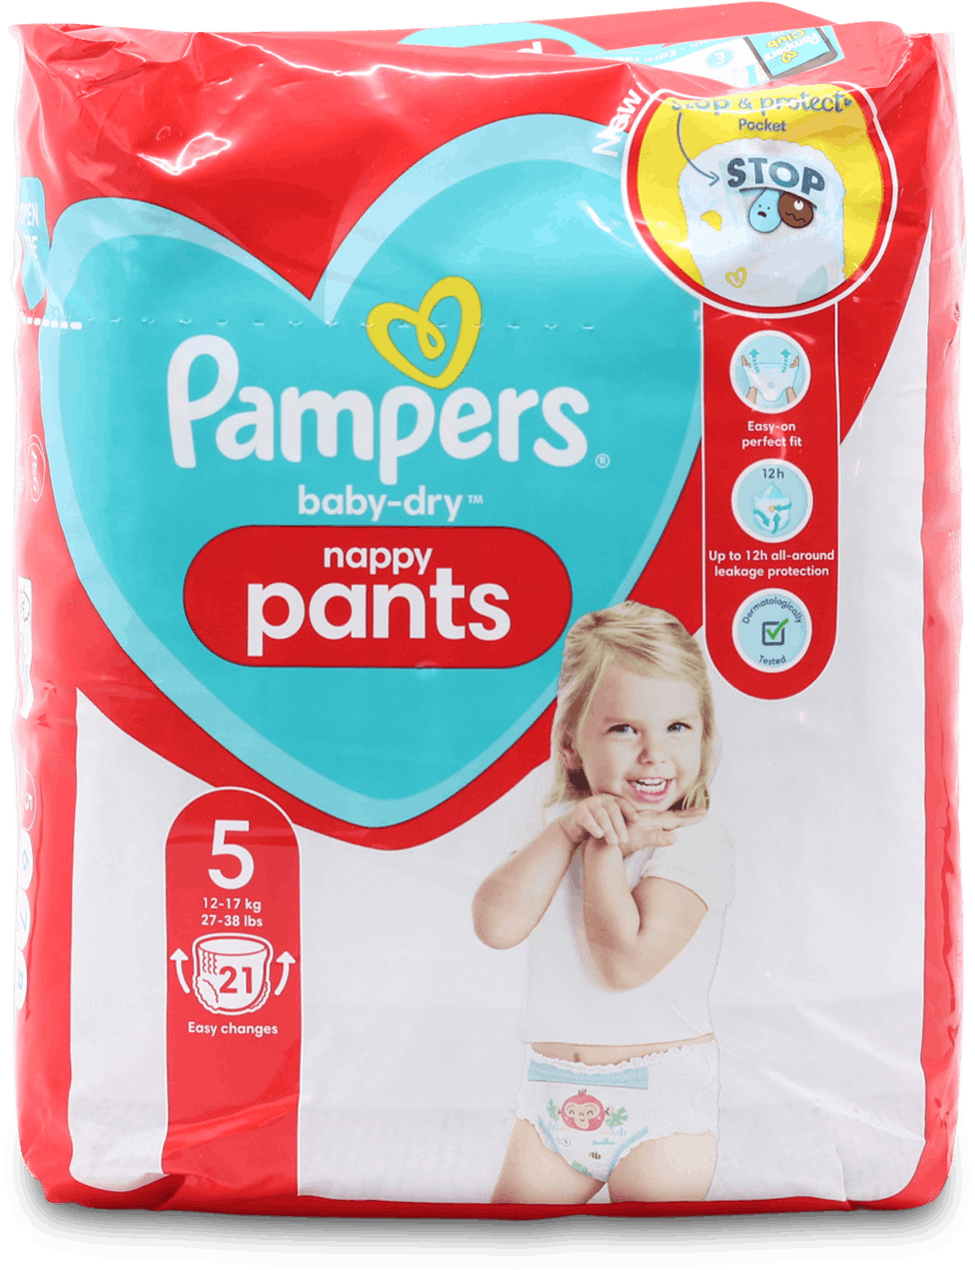 Pampers Baby-Dry Nappy Pants Size 6 Pants Jumbo + Pack | Morrisons